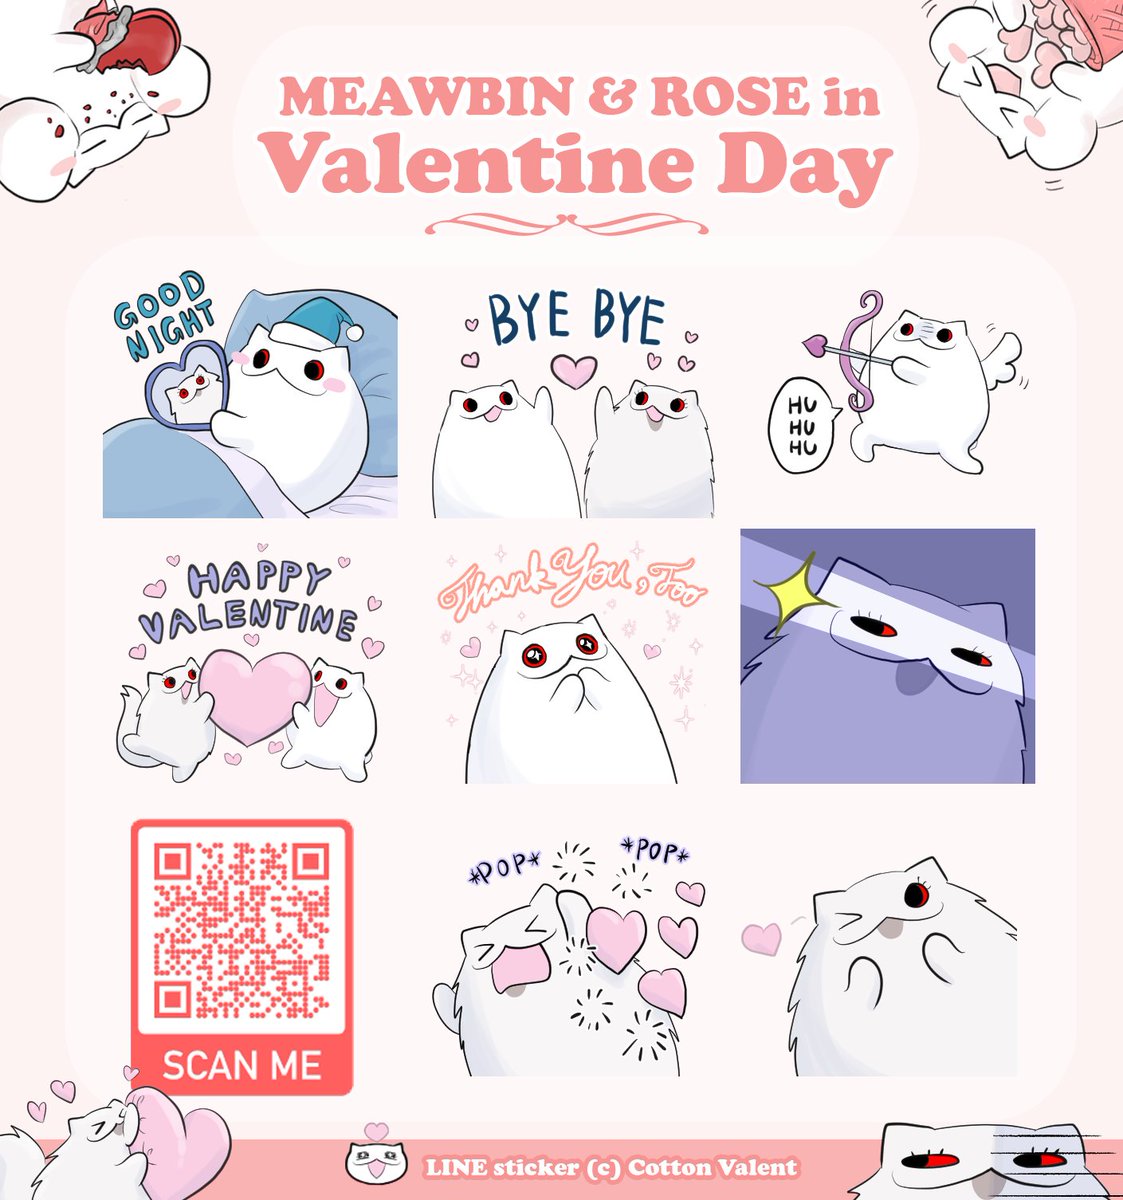 💕💕Love is in the air💕💕
"Meawbin & Rose in Valentine Day" is available for your Valentine!
https://t.co/yBsv1meuWF 